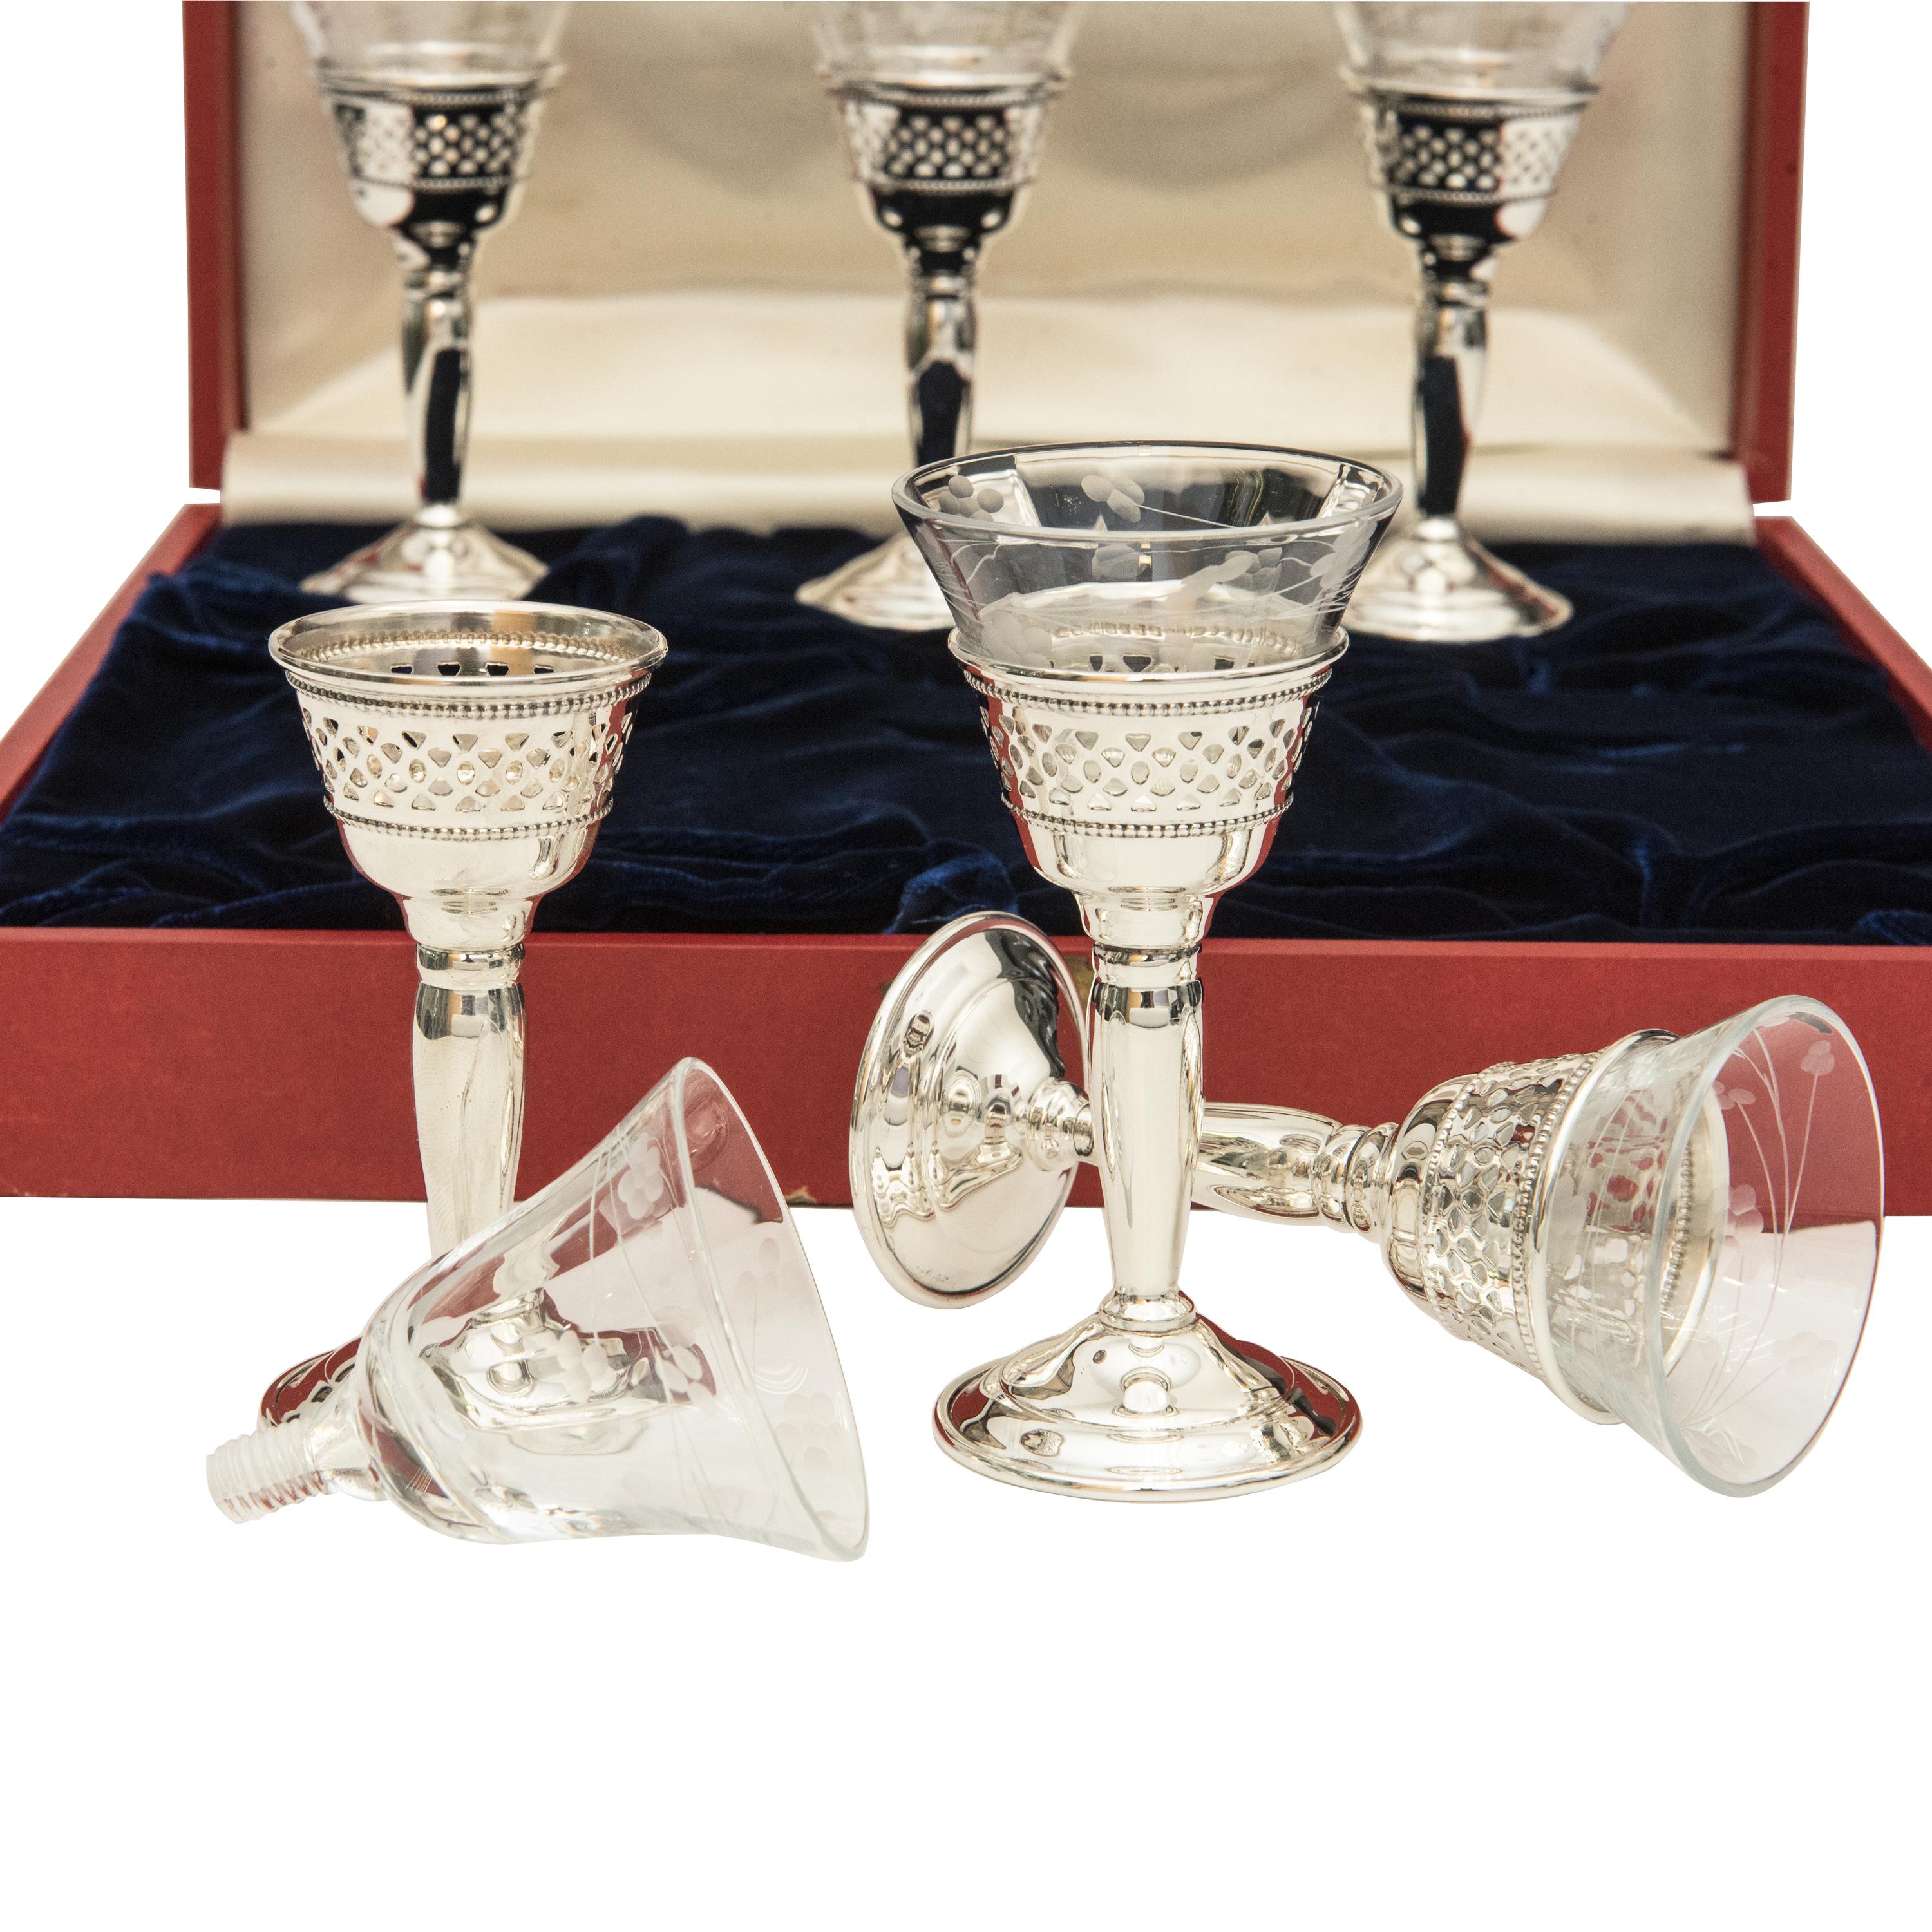 Rarely seen and never used, full set of hand cut crystal & sterling silver Cartier Cordial glasses with original box! Cartier is one of the most prestigious jewelry manufacturers in the world with a long history for making jewelry for royalty.